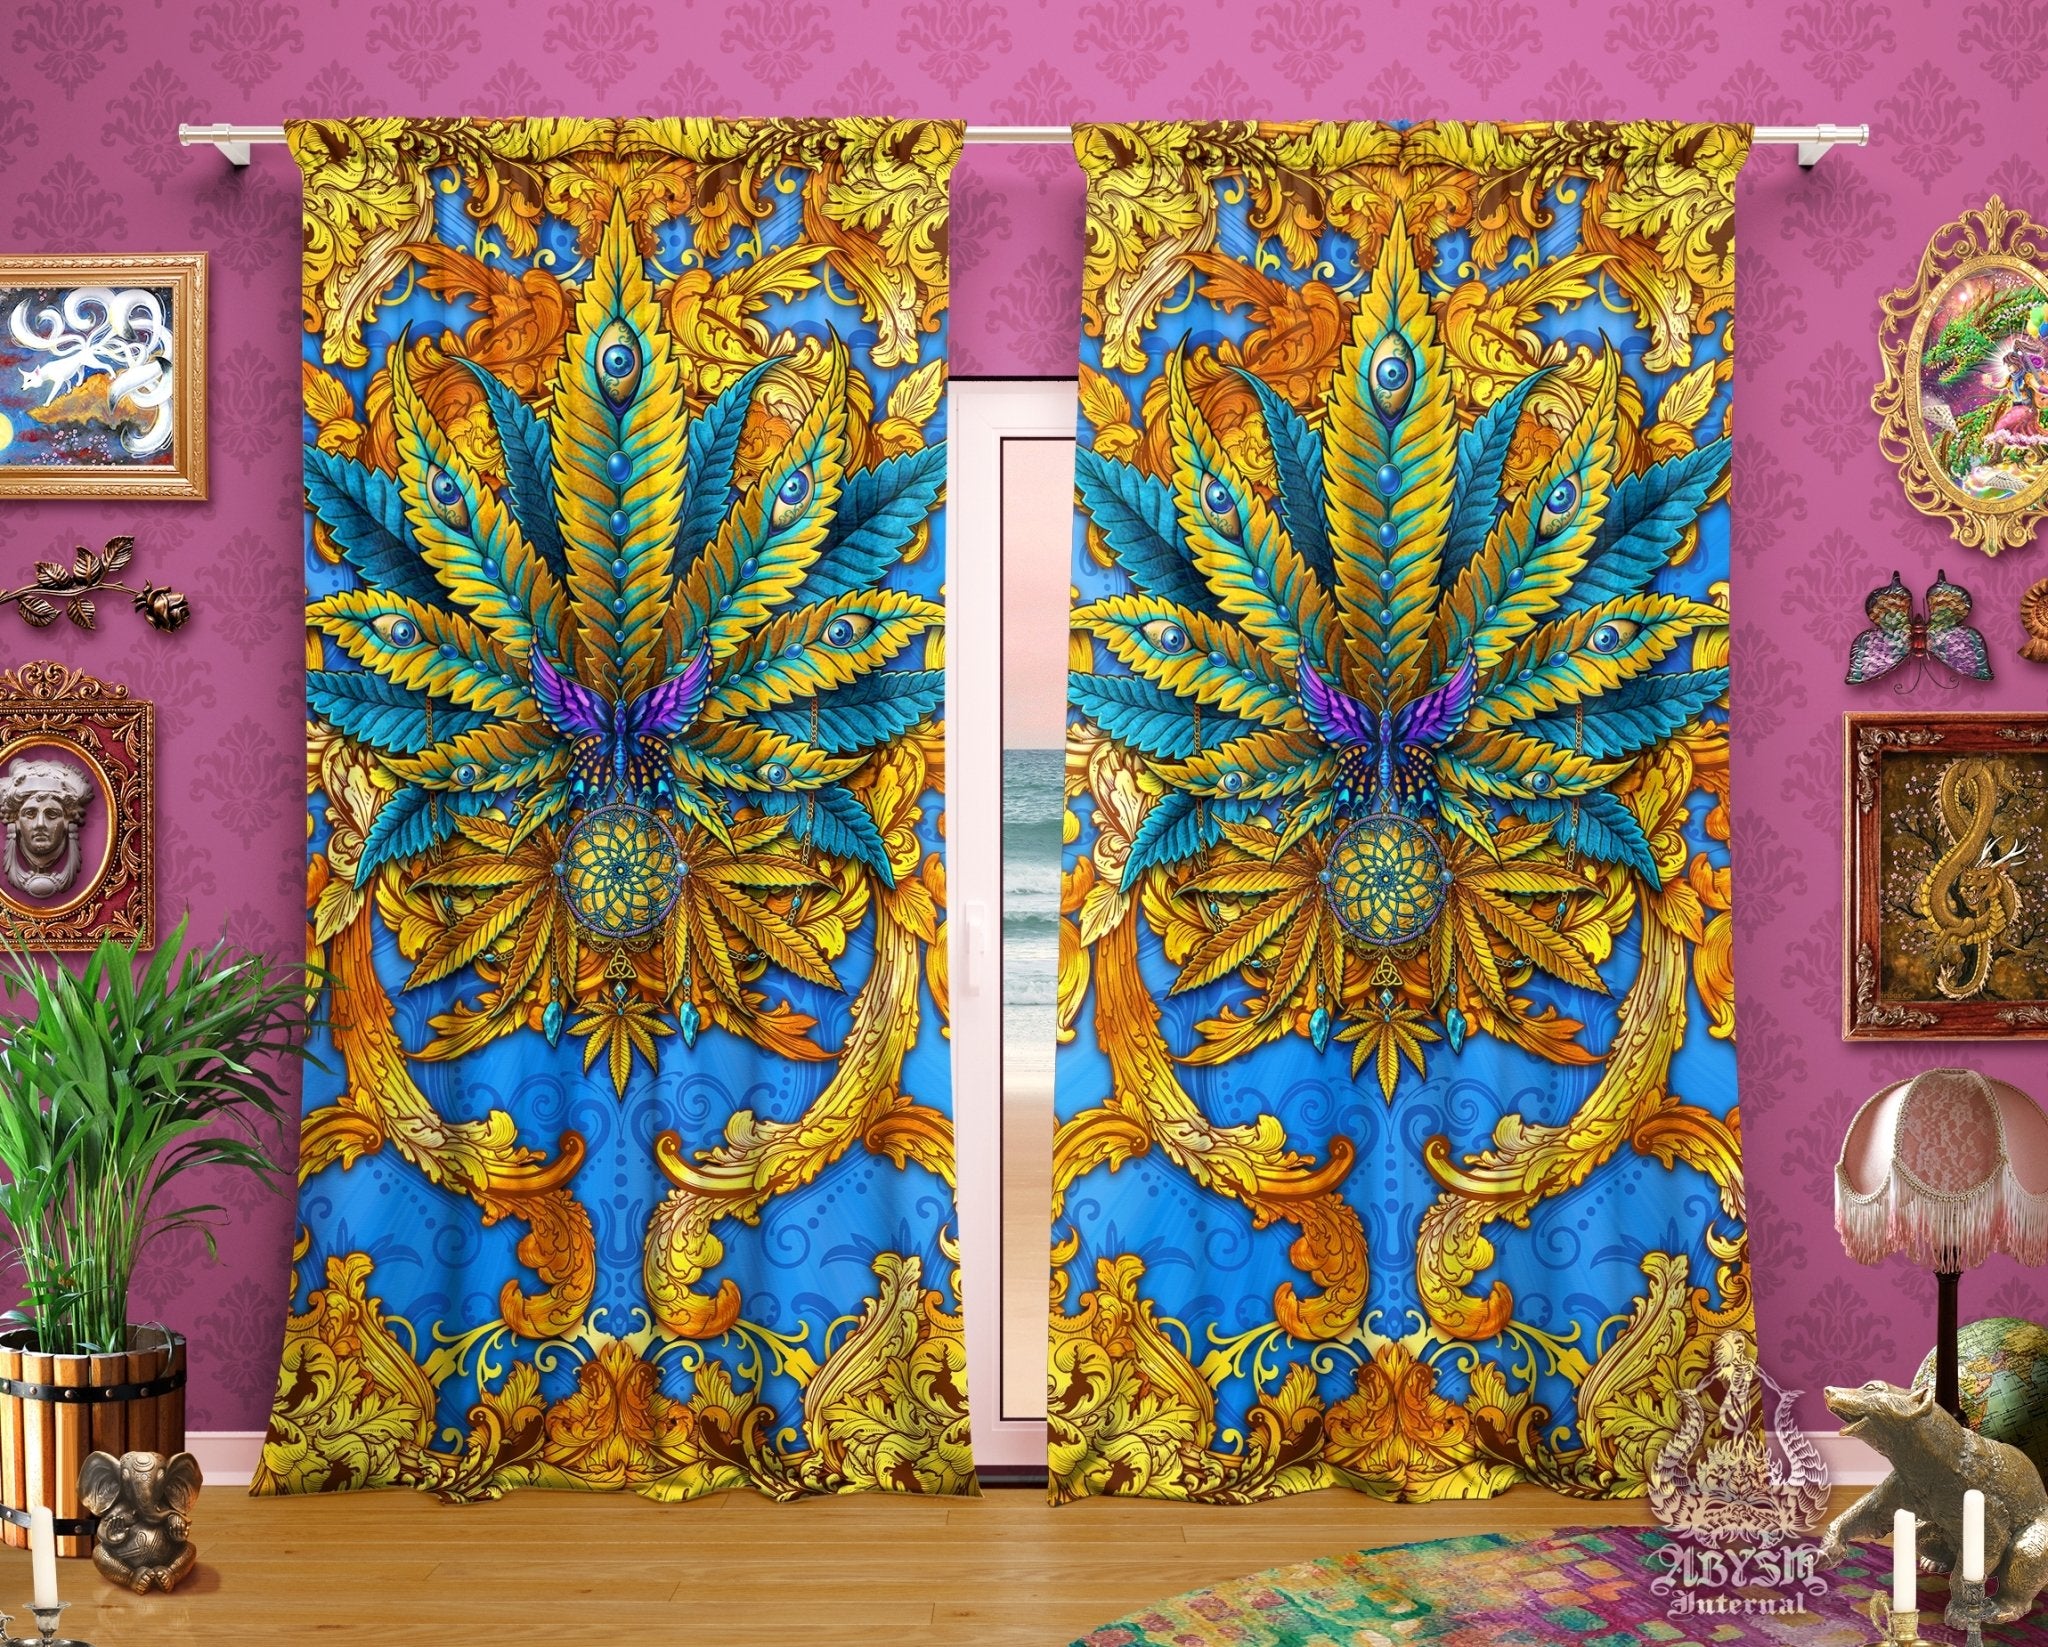 Weed Blackout Curtains, Cannabis Home and Shop Decor, Long Window Panels, Indie Hippie Print, 420 Room Art - Cyan and Gold - Abysm Internal